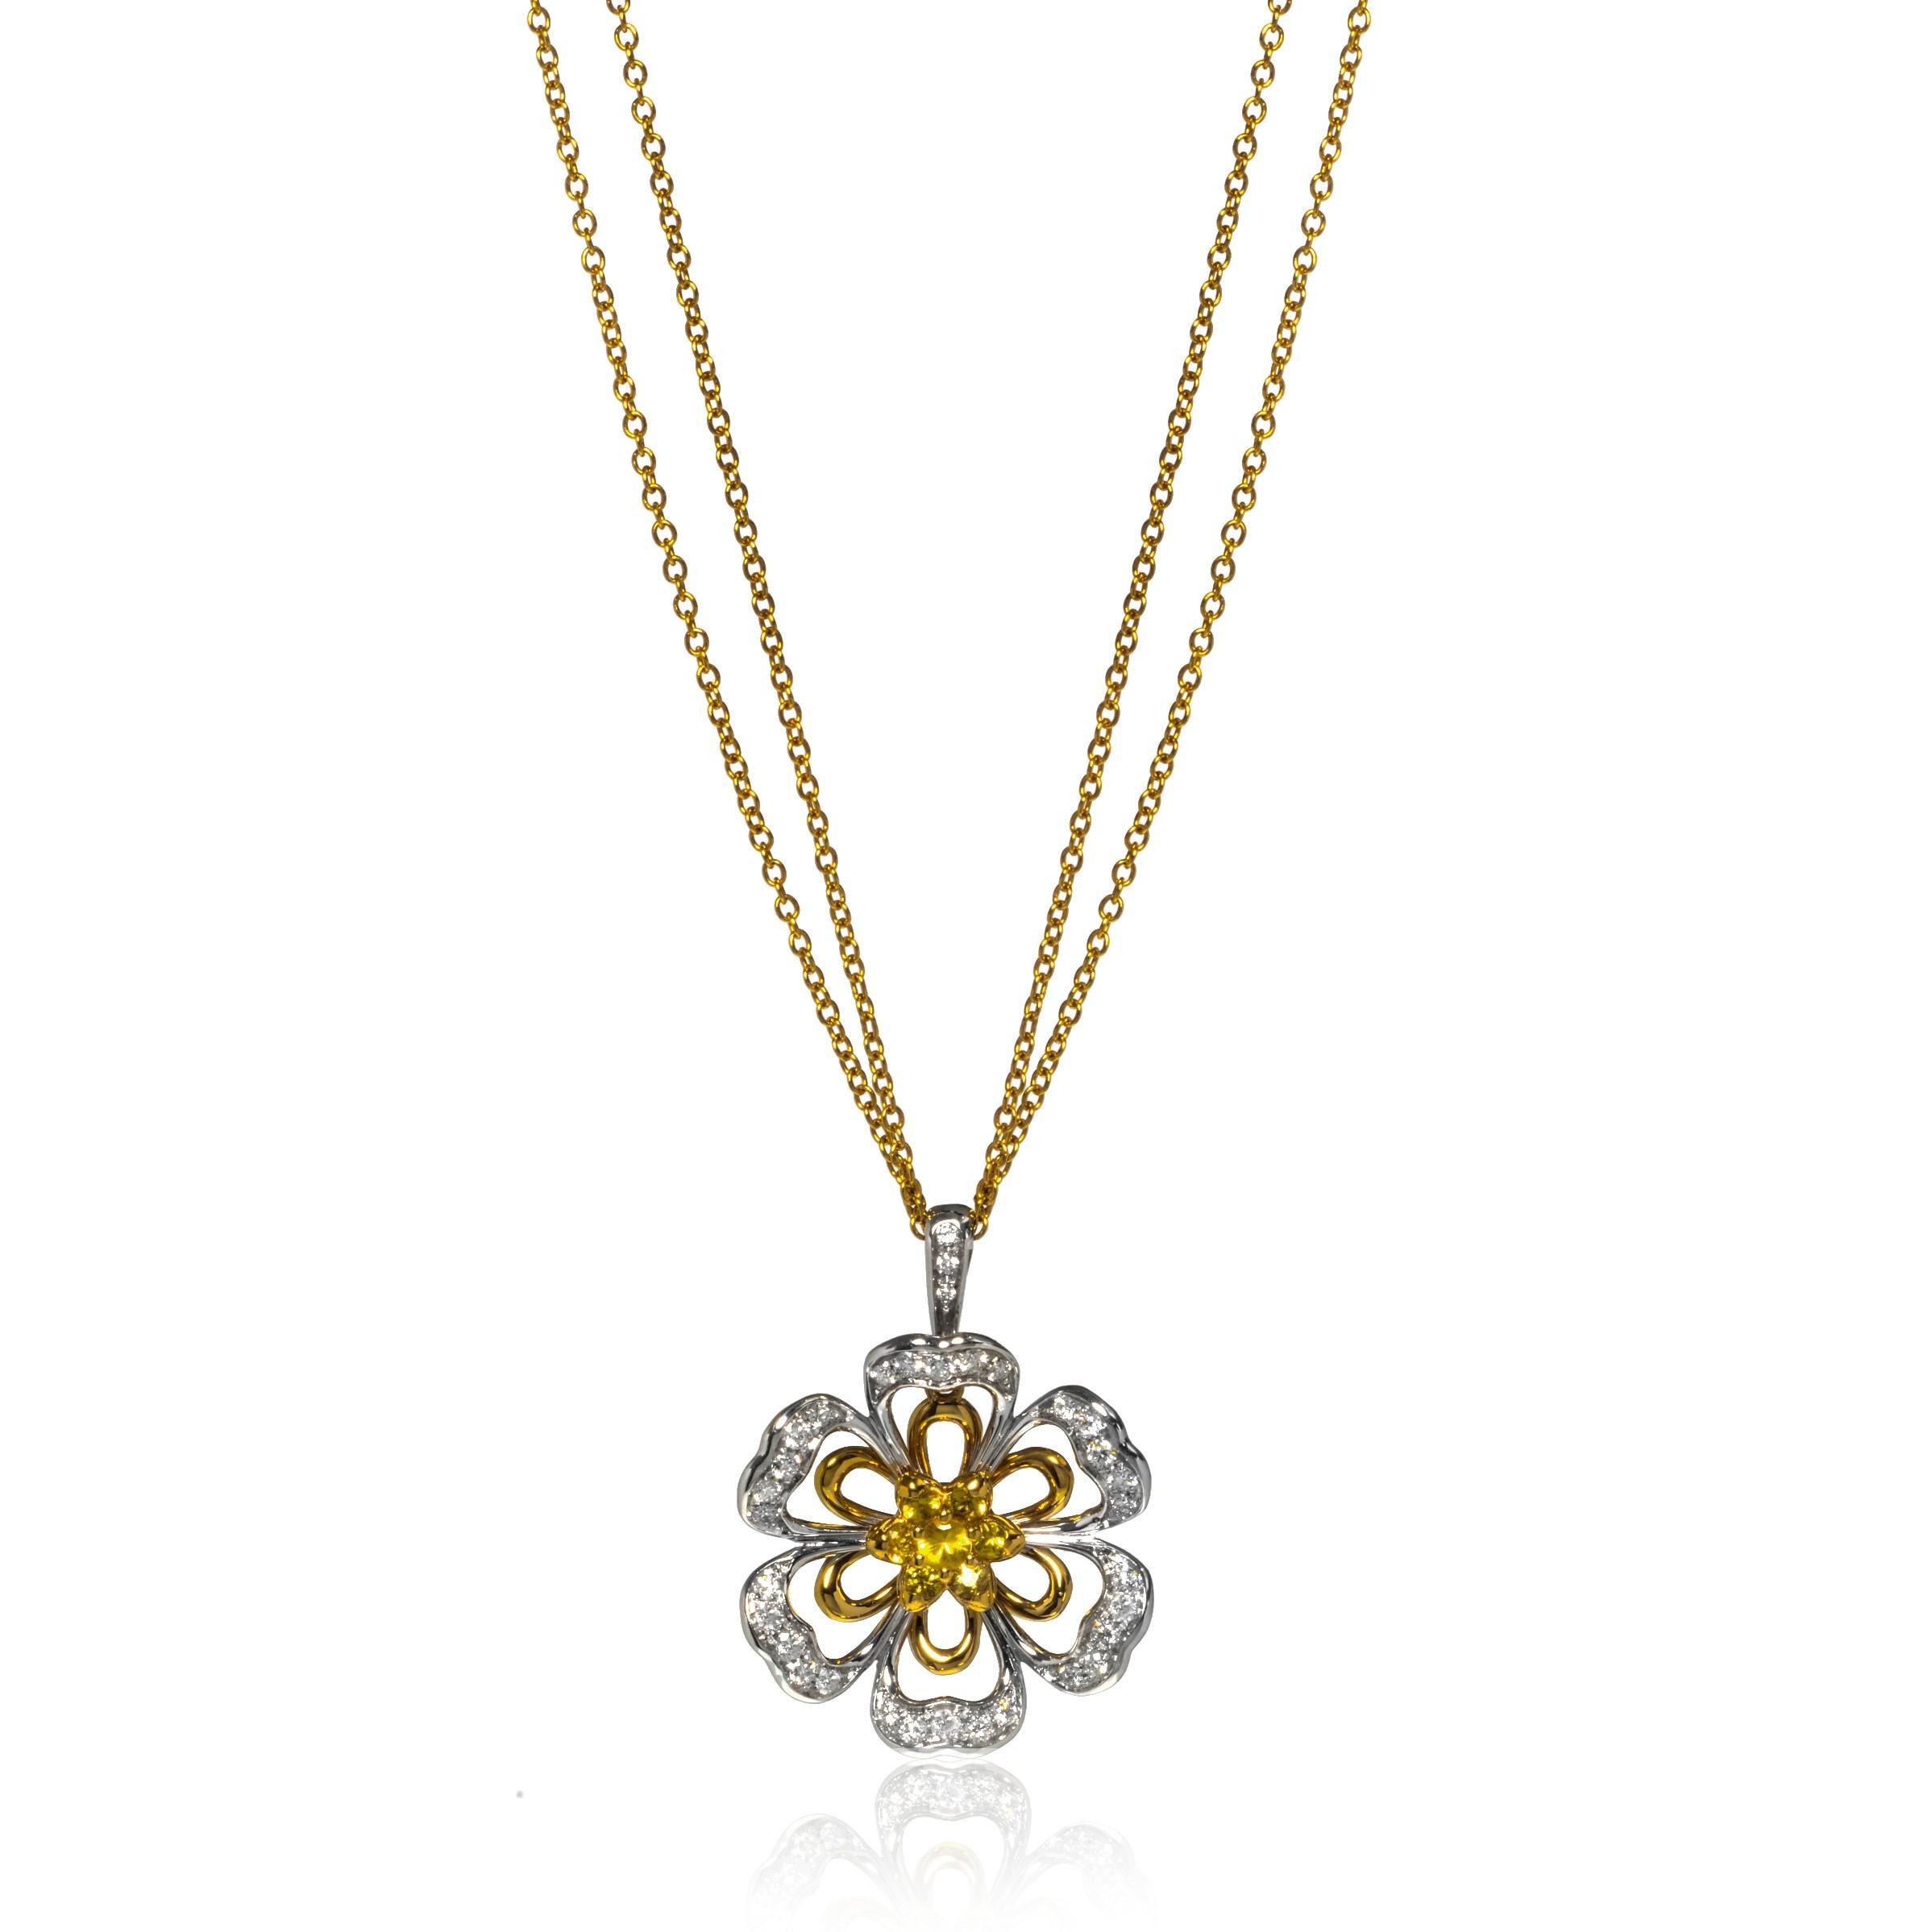 This beautiful Luca Carati 18k yellow and white gold pendant necklace features a gorgeous display of diamonds weighing 1.11cttw and Yellow sapphires weighing 0.59cttw in flower shape design. An 18k white gold floral setting overlaid on the yellow